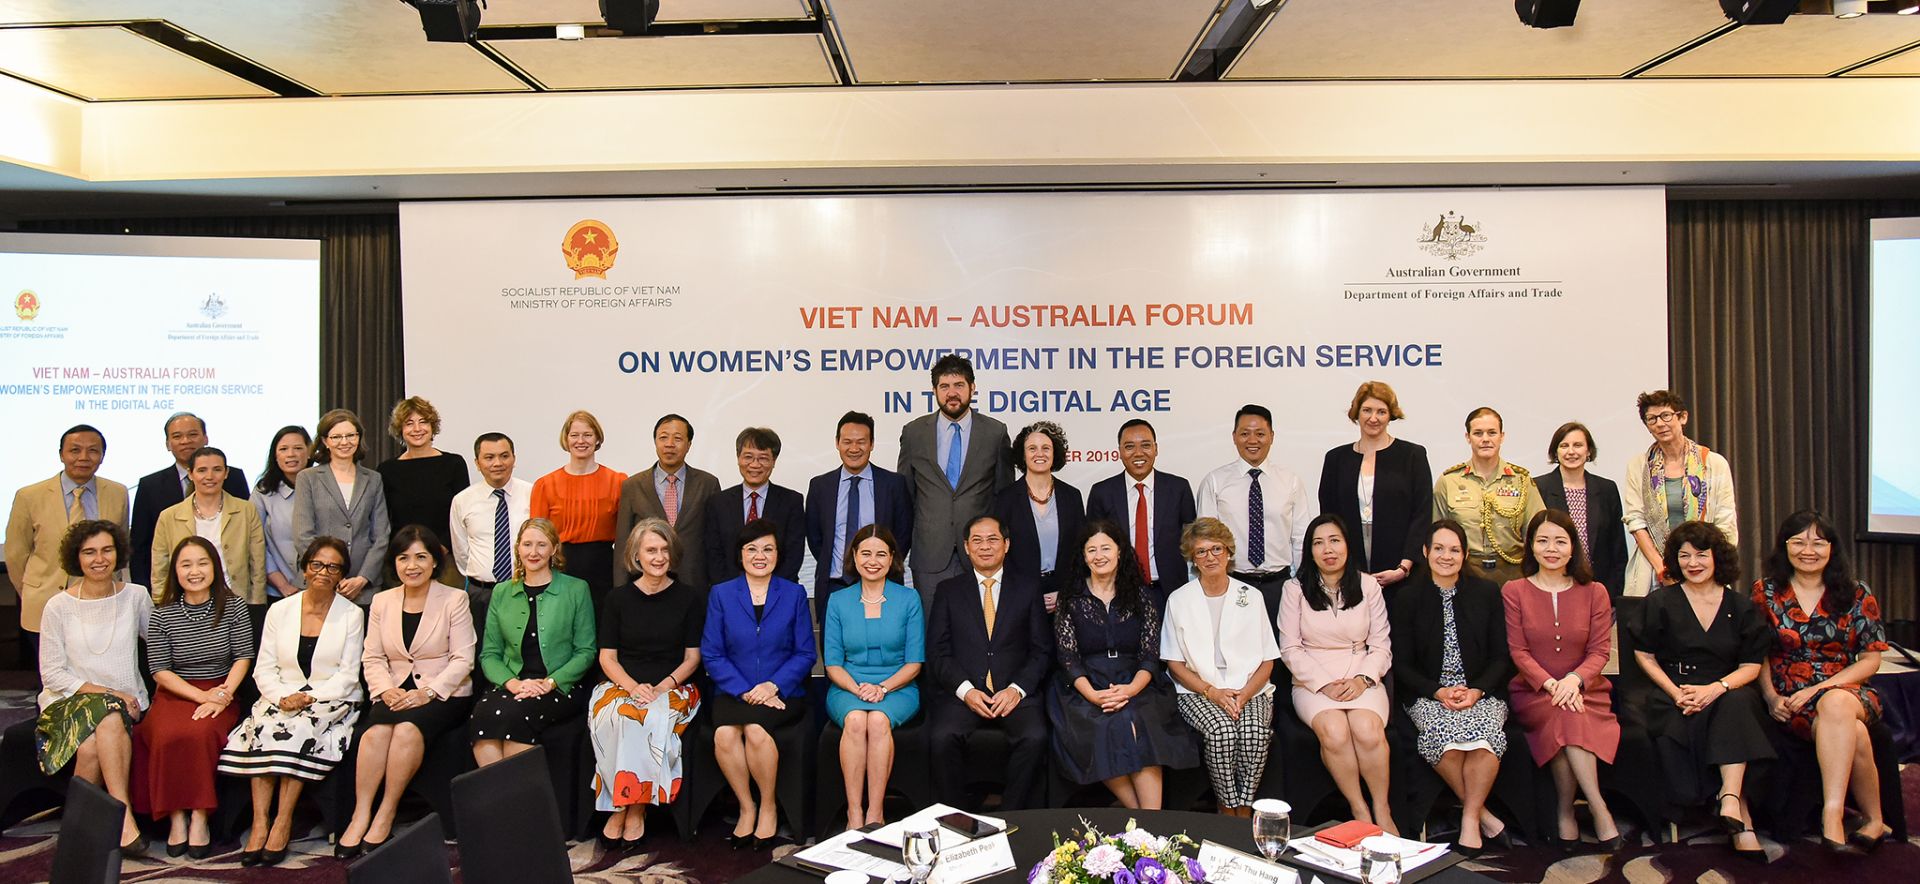 joint statement of vn australia forum on womens empowerment in the foreign service in the digital age